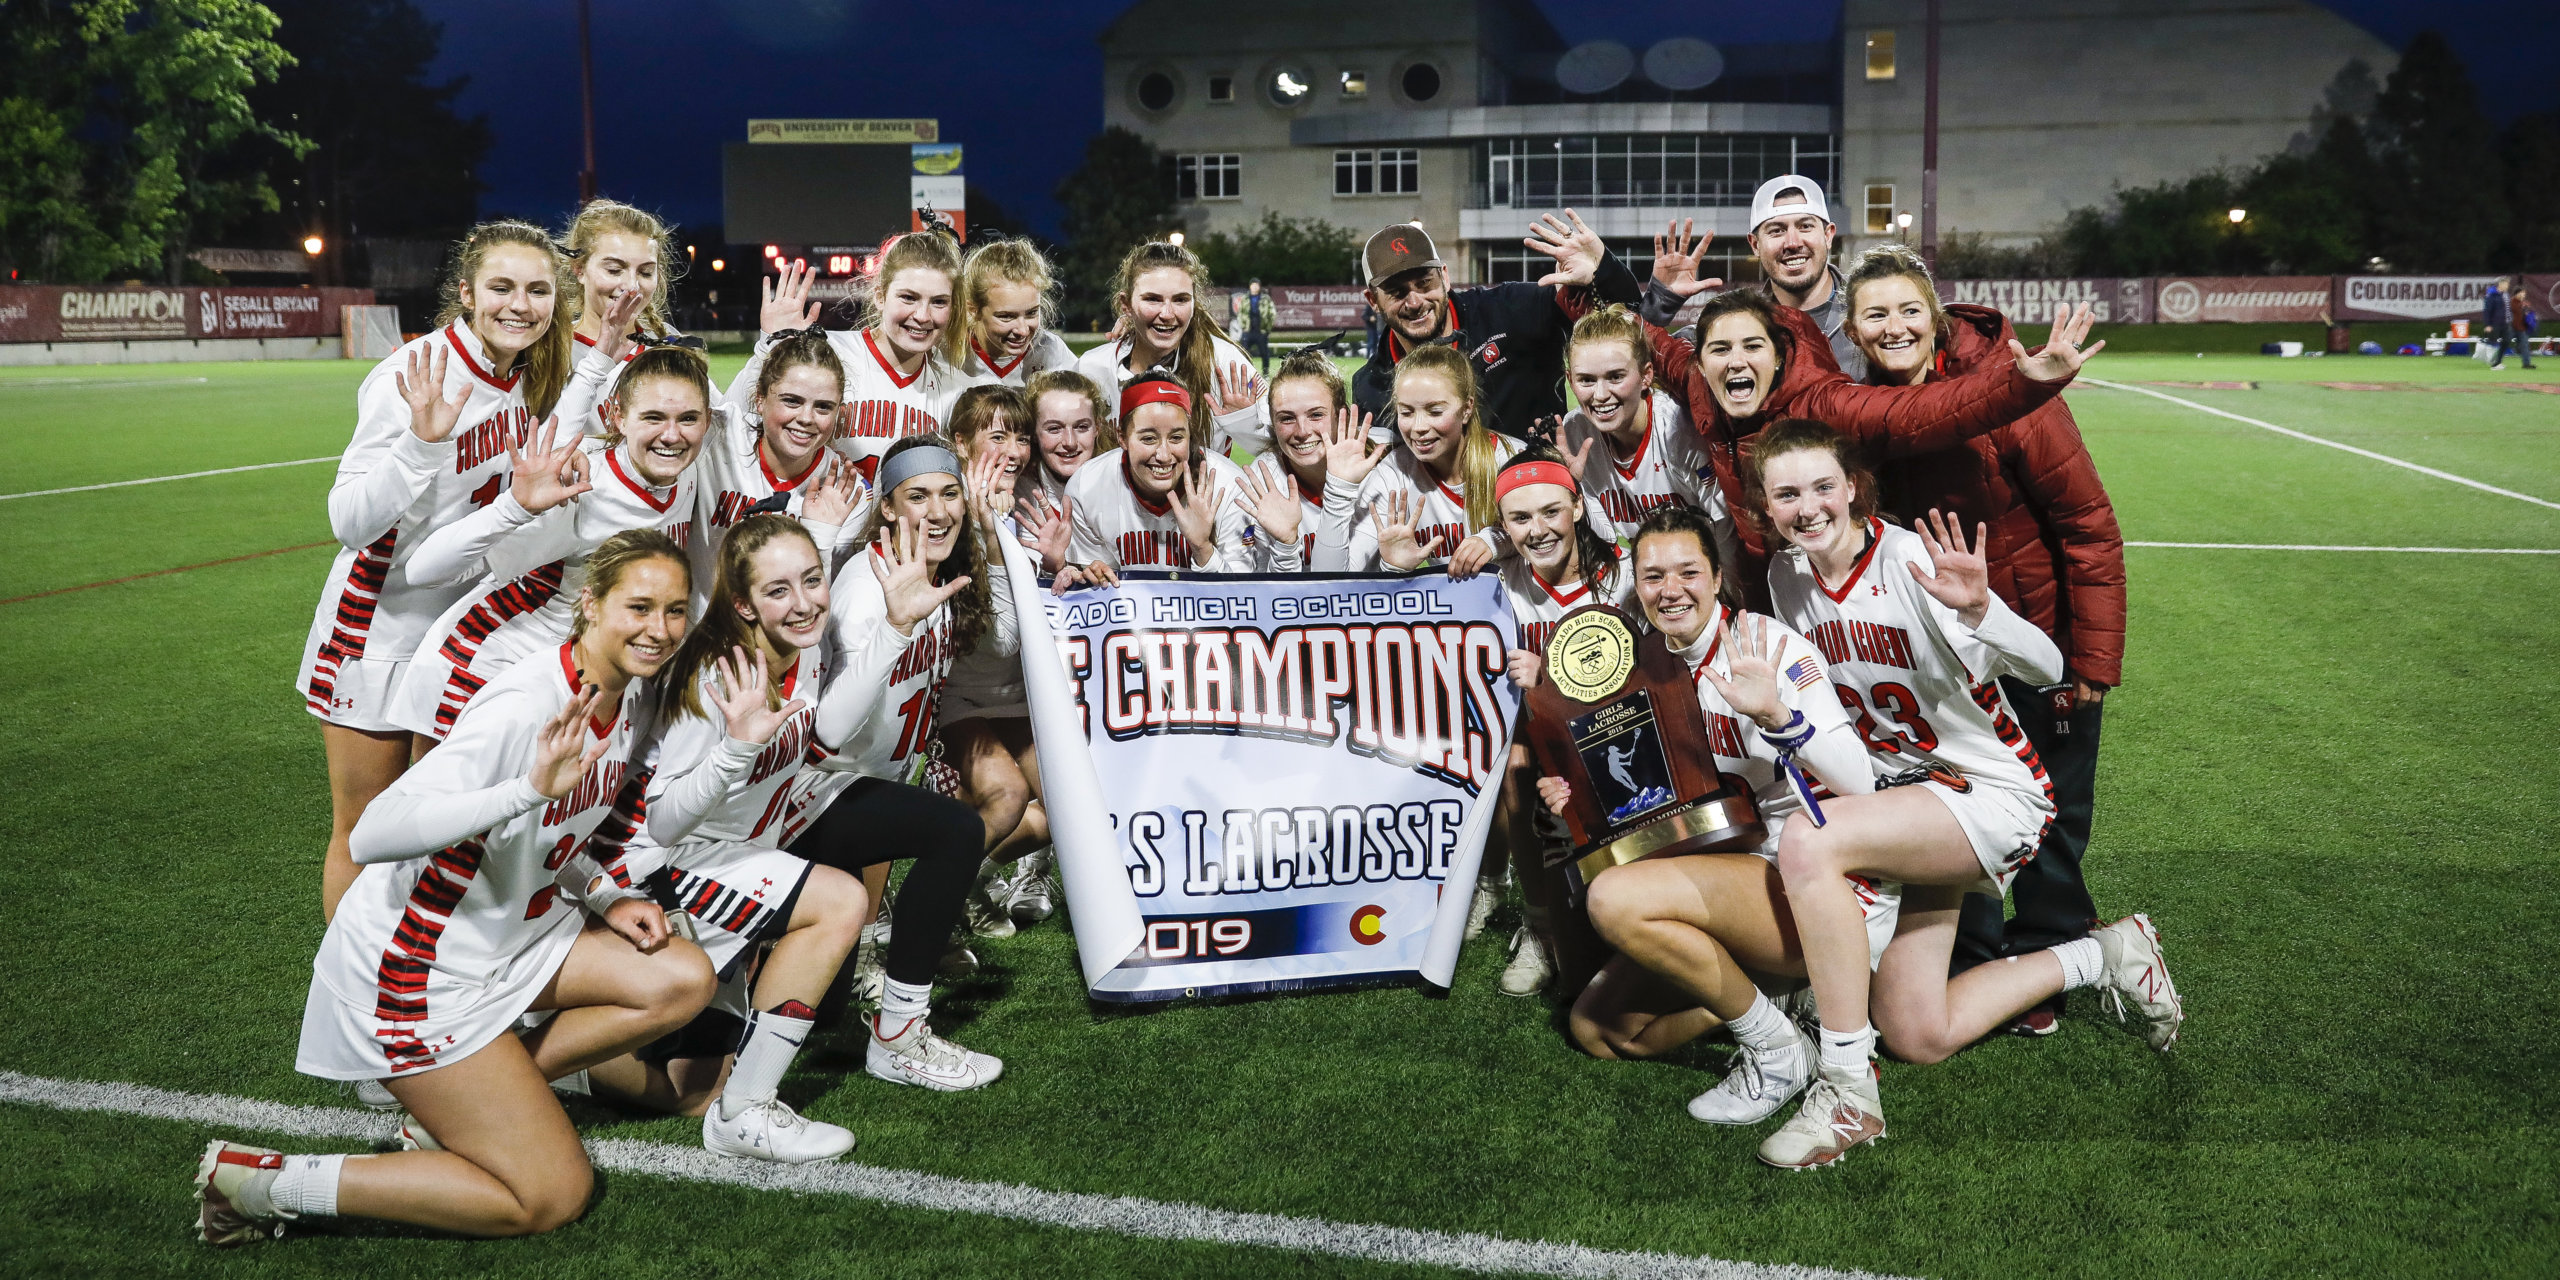 Colorado Academy beat Cherry Creek, 9-5 to take e their fifth straight Girls Lacrosse State Championship.